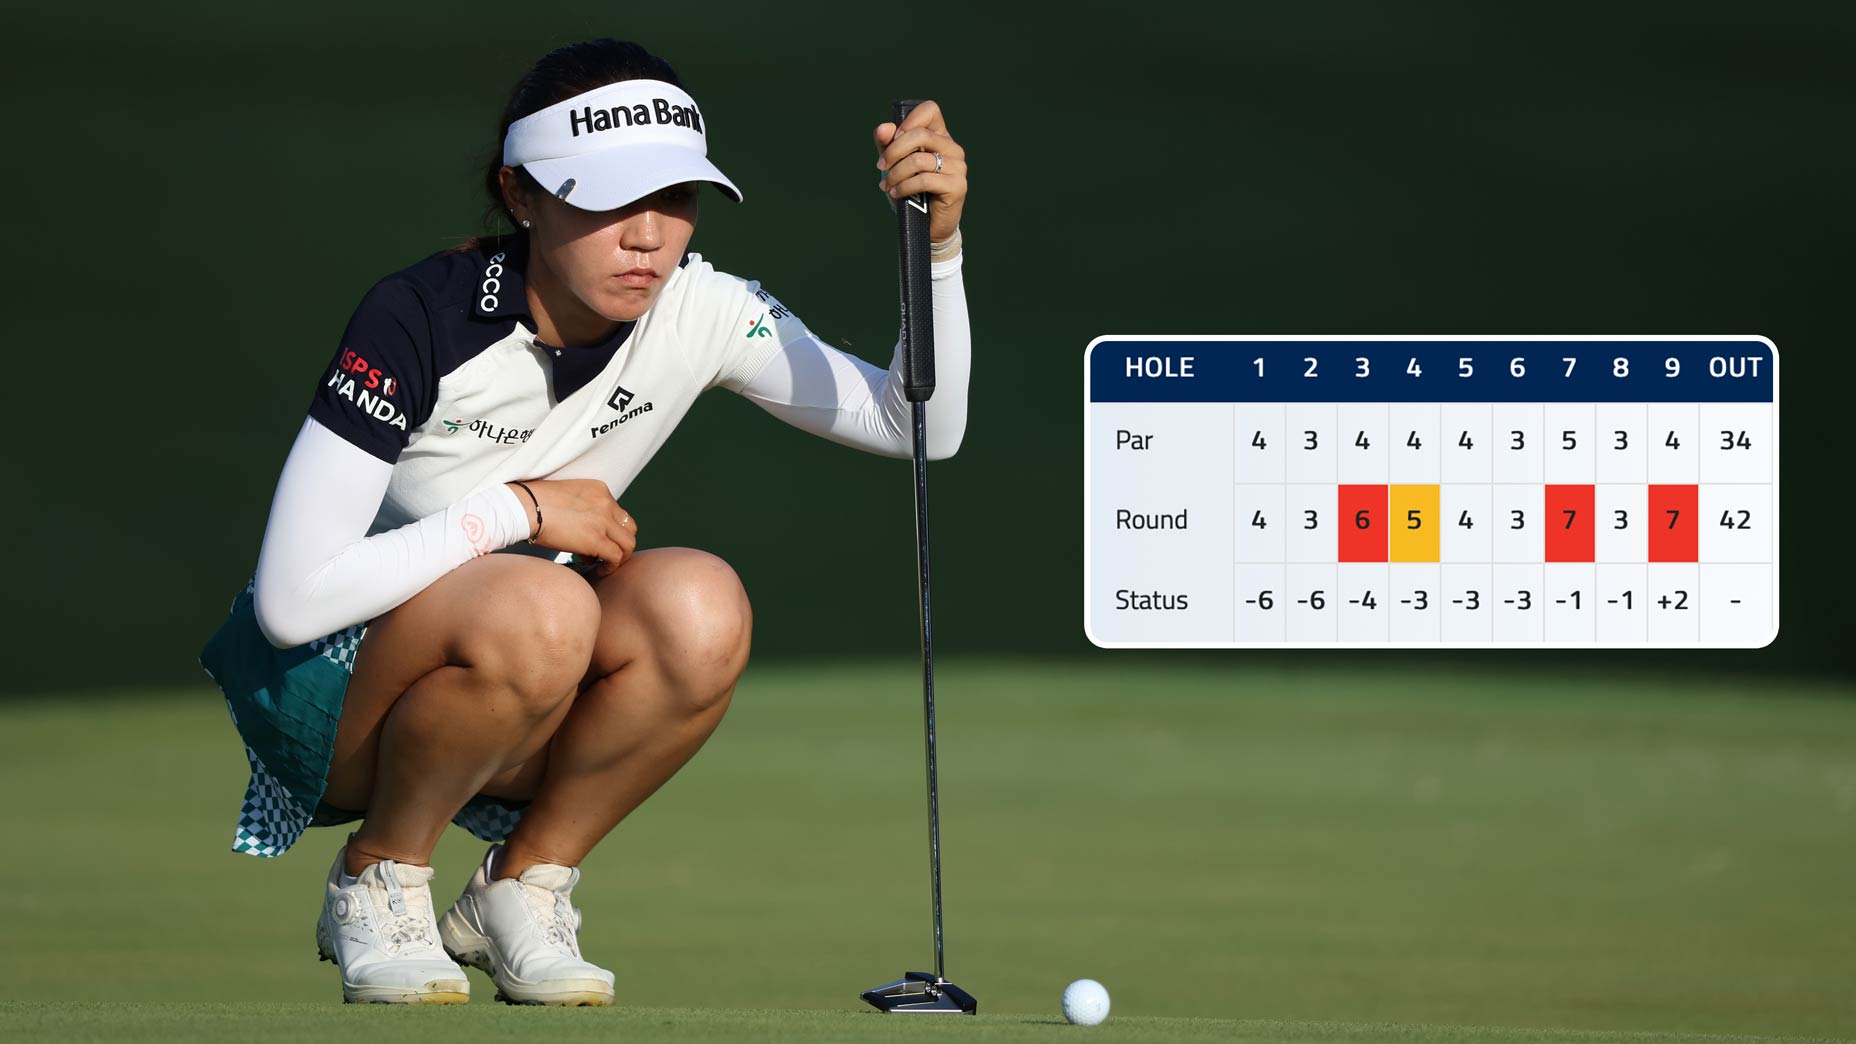 After rules misunderstanding, World No. 3 golfer hit with 7 penalty strokes